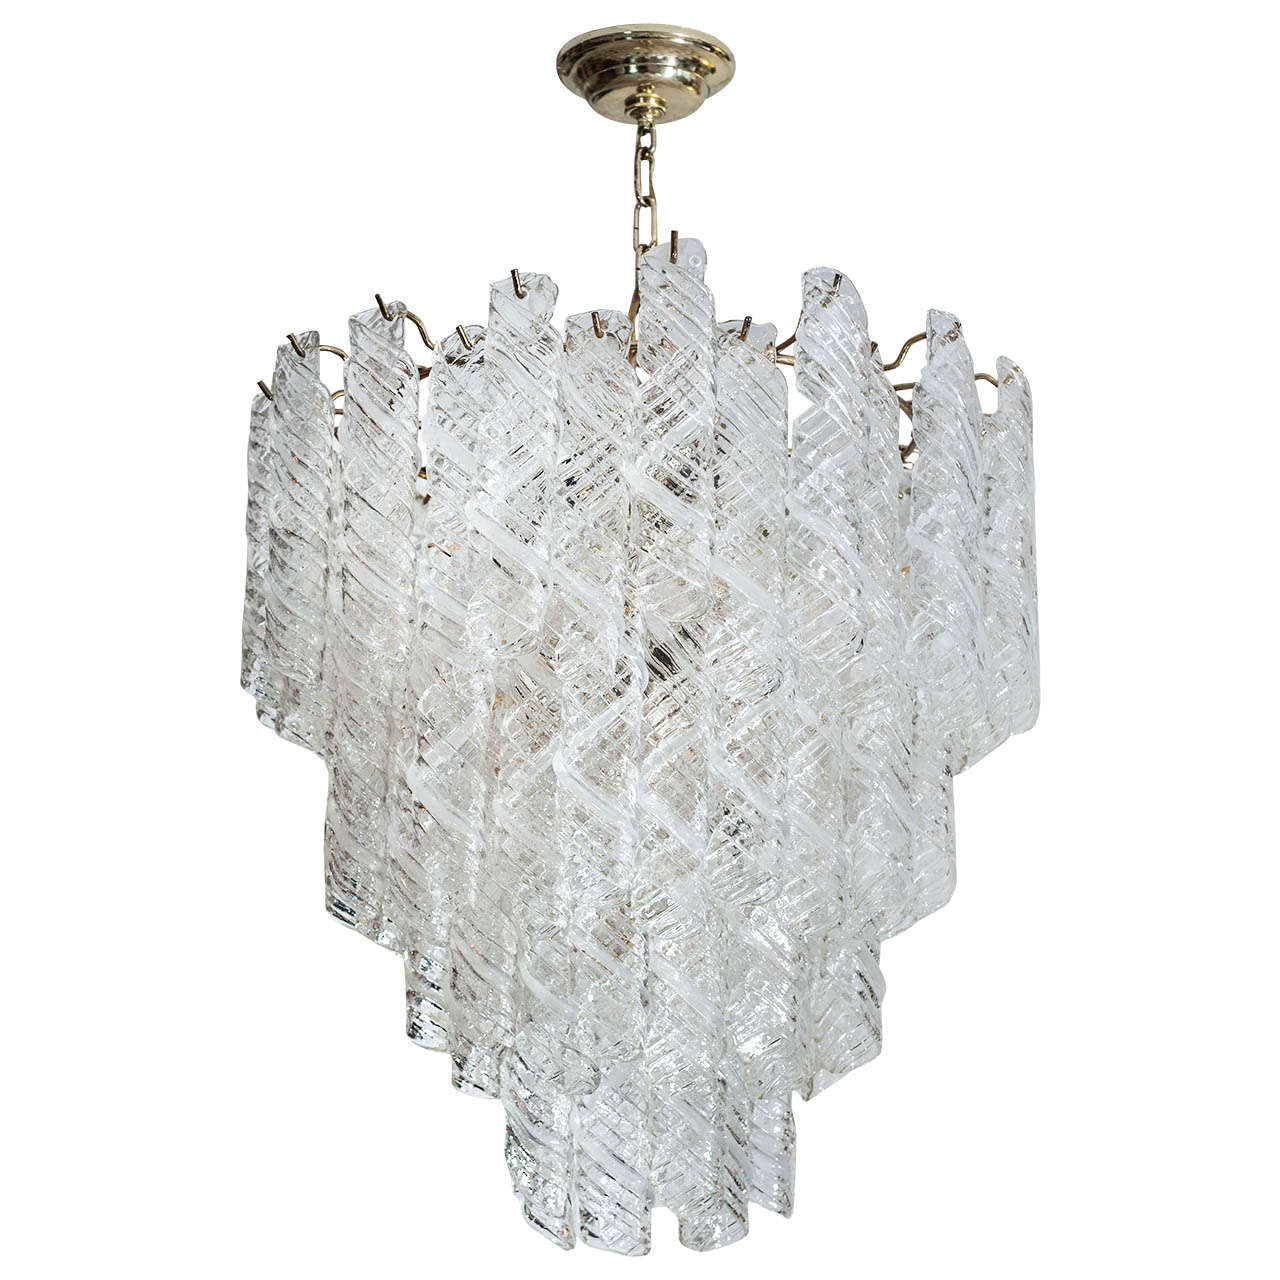 A Magnificent Murano Chandelier